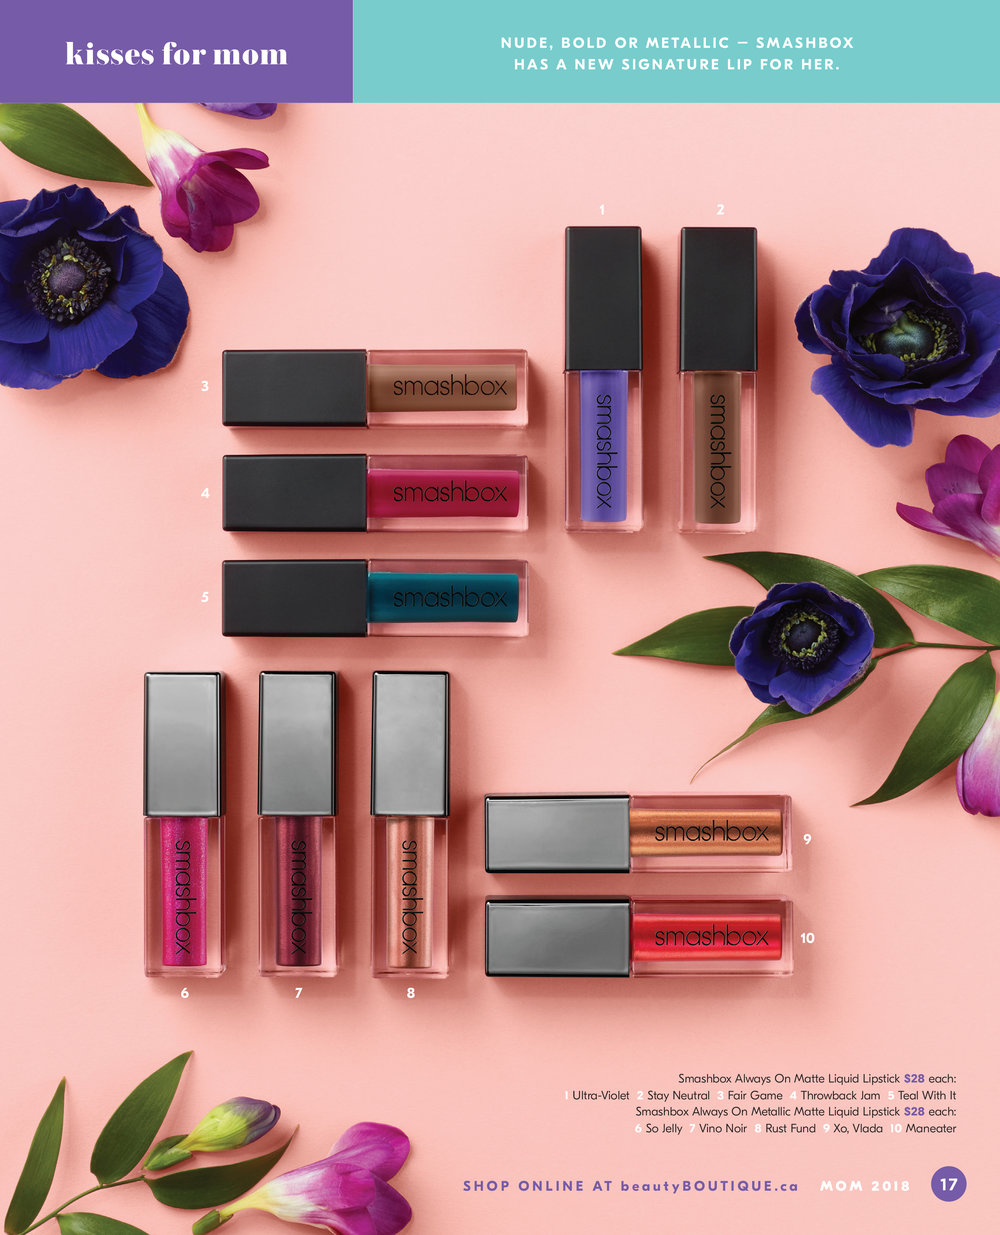   “Show Mom Some Love.”  Mother’s Day Gift Guide. Shoppers Drug Mart. January 2018. Photo: Luis Albuquerque. Art Director: Jacqueline Abernethy 